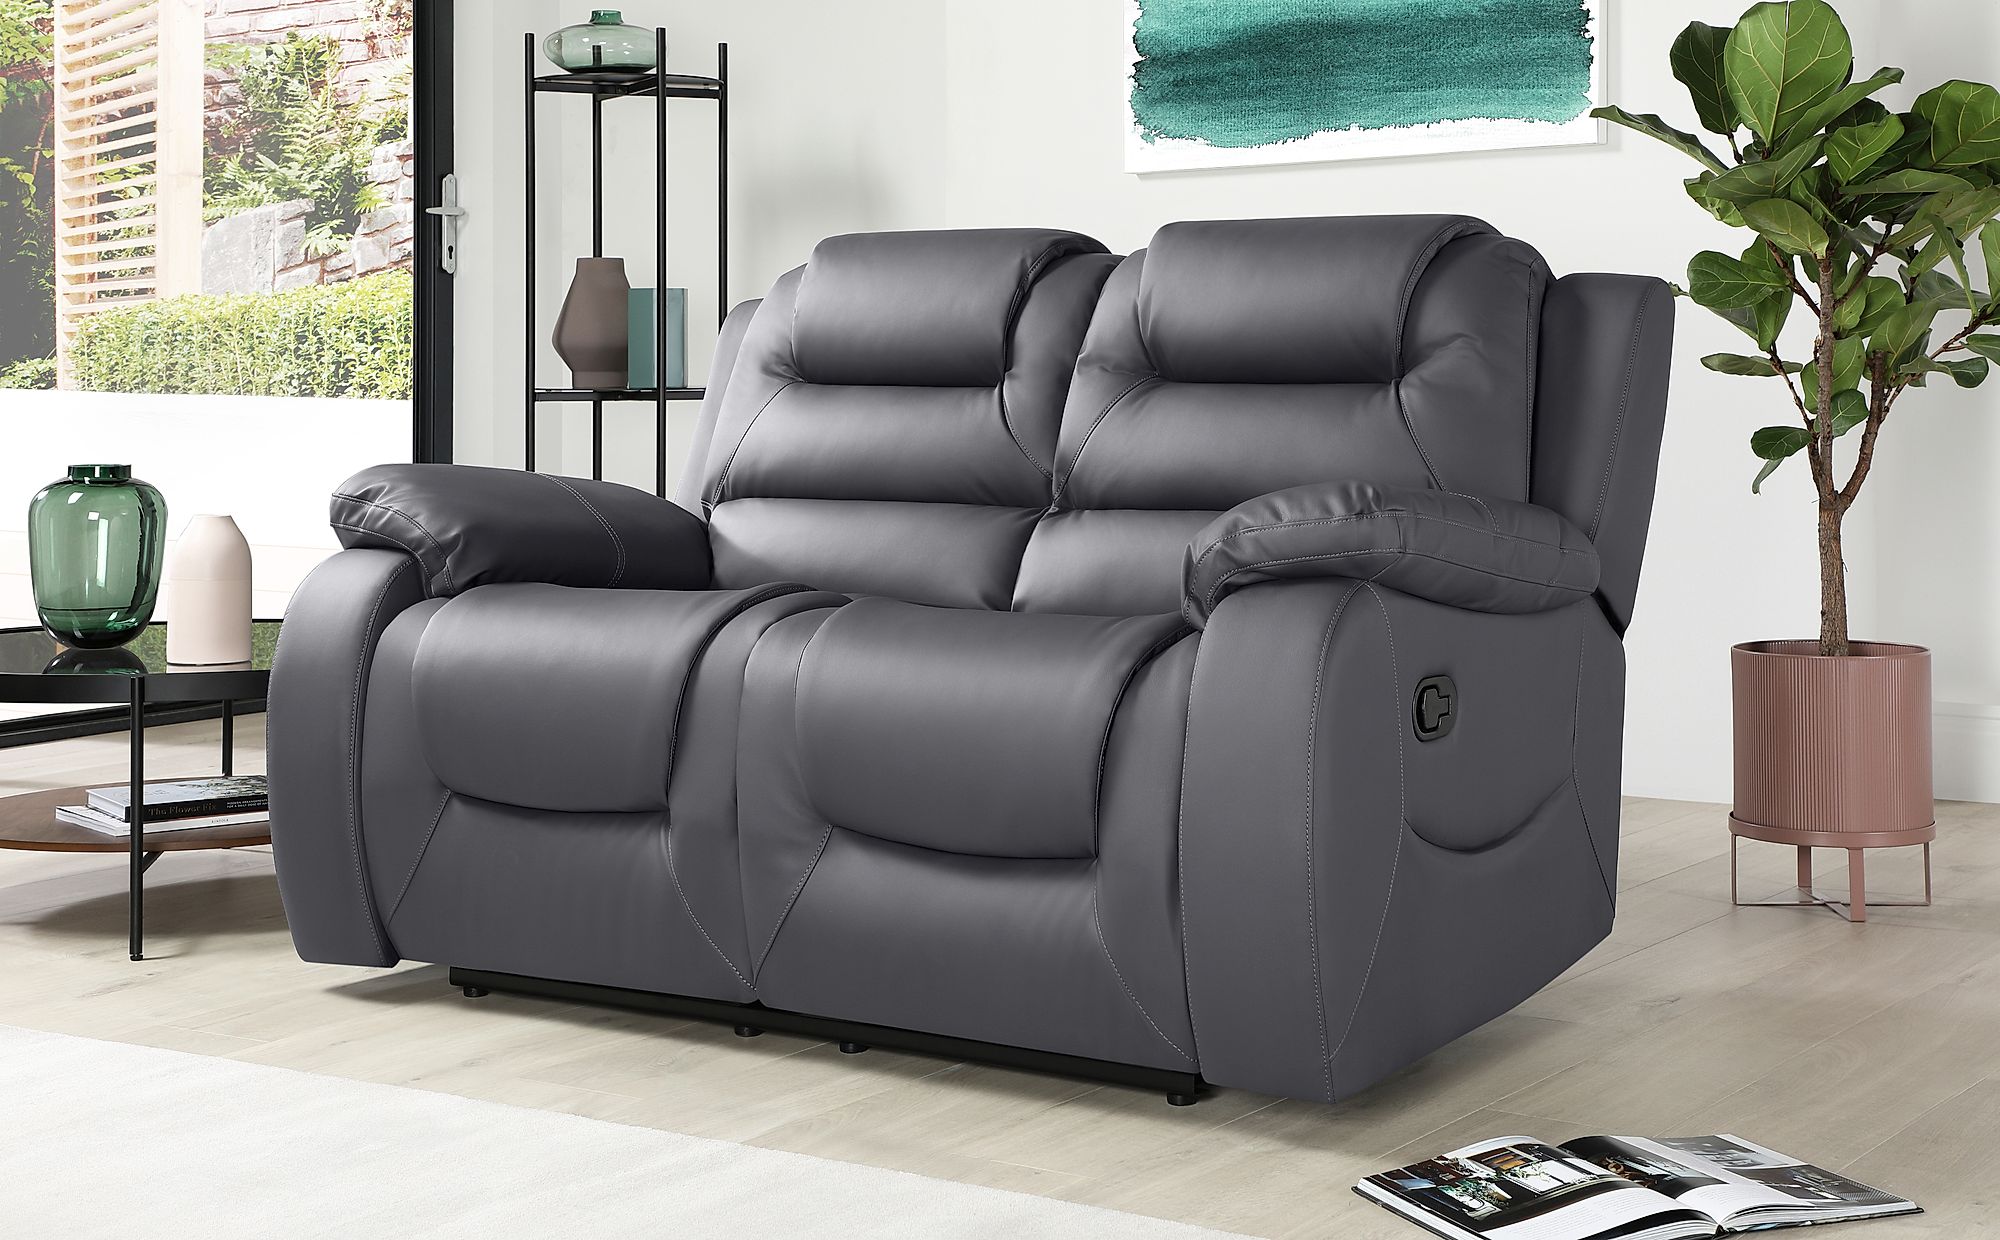 2 seater leather sofa chairs